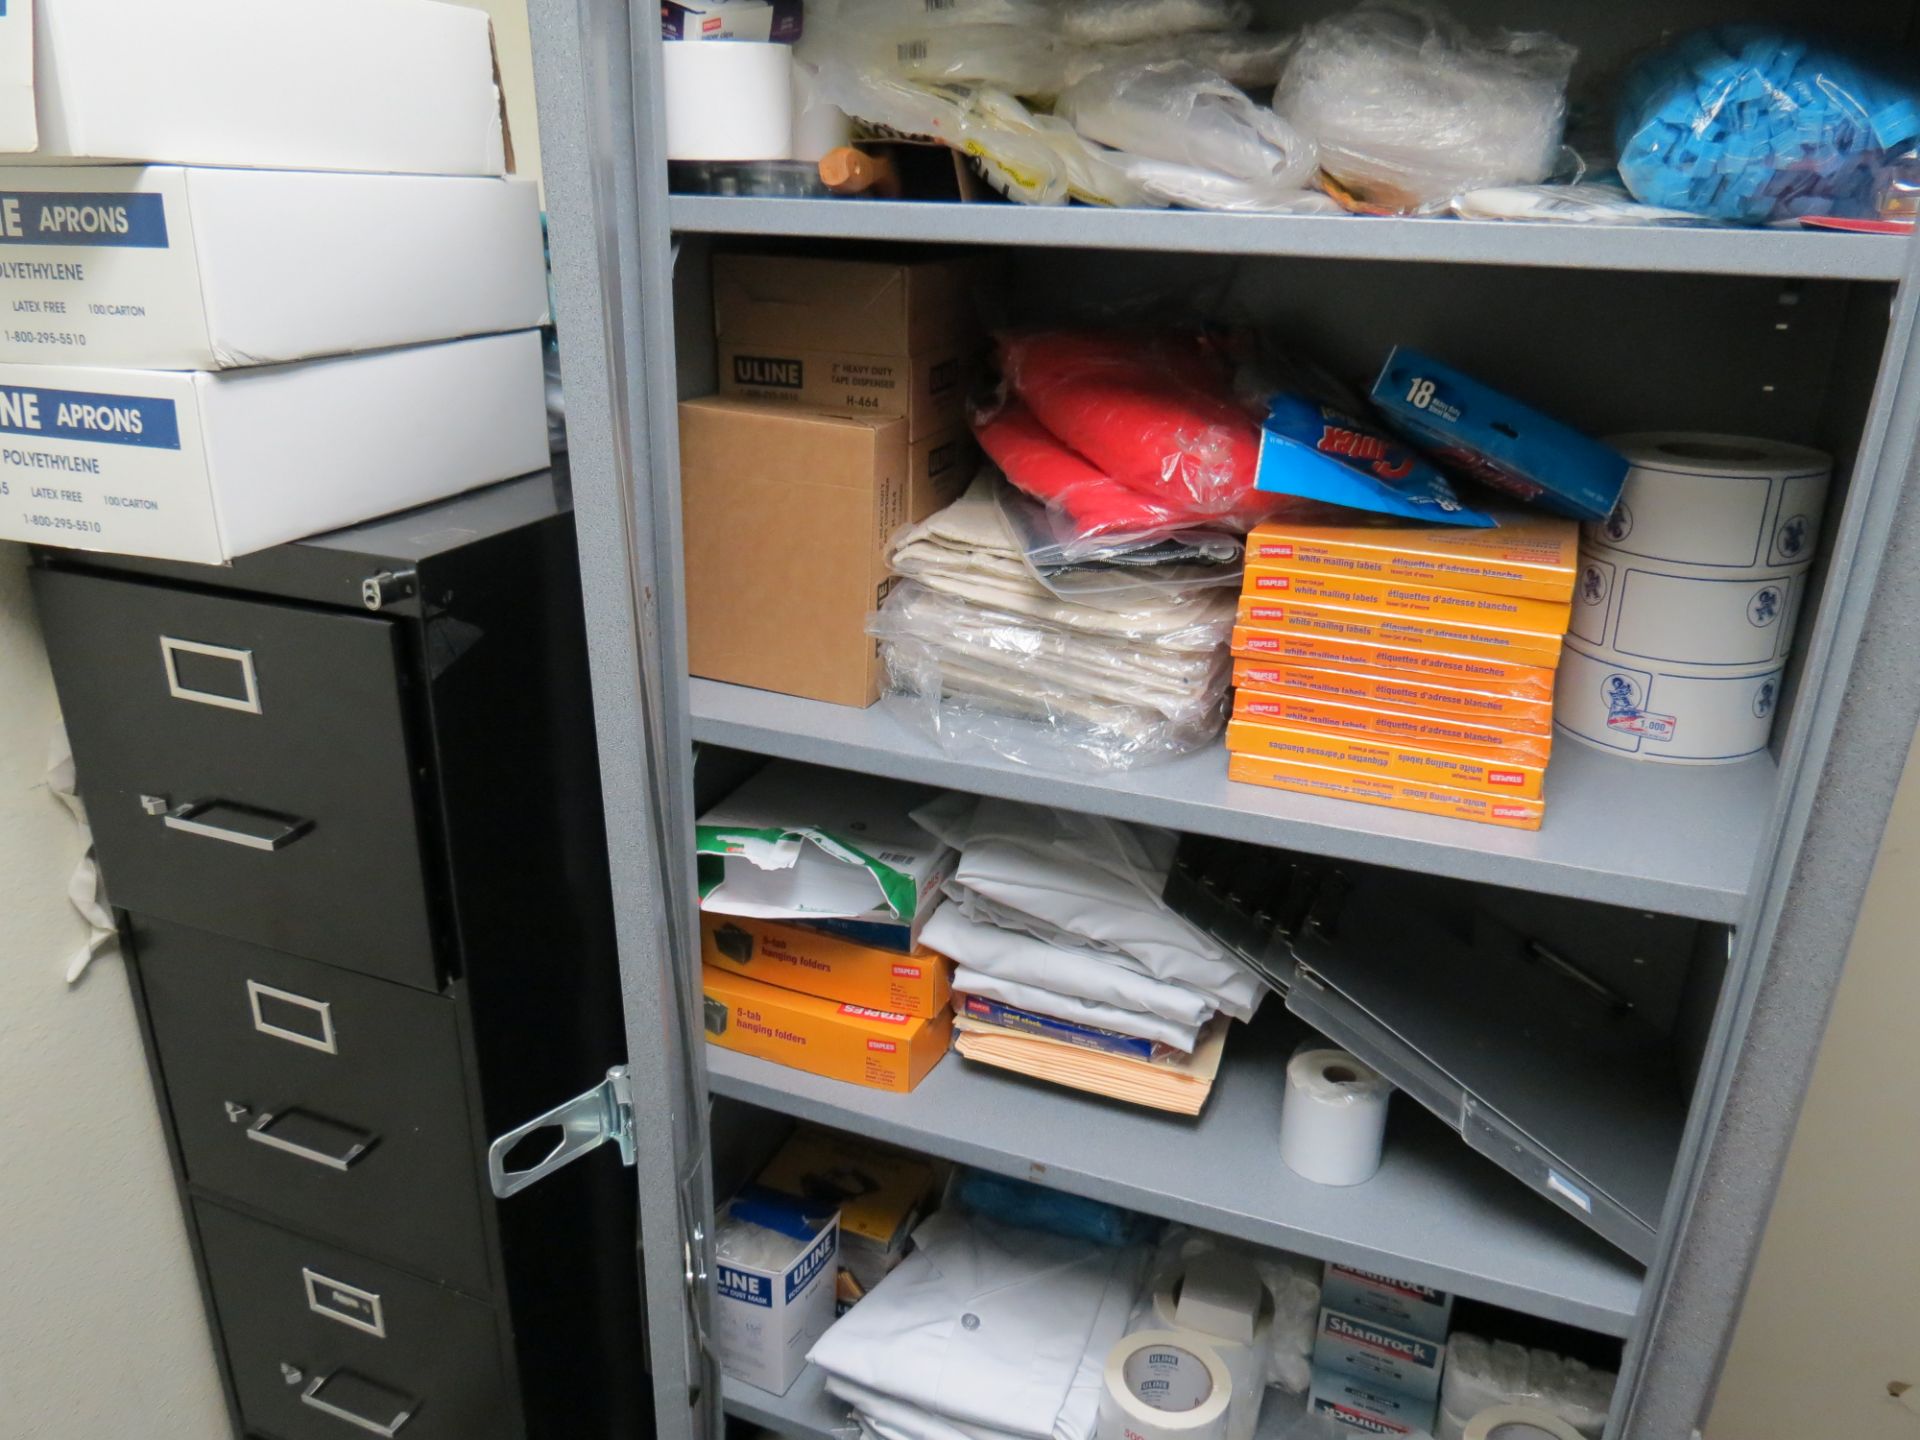 LOT CONTENTS OF ROOM, 5-ASSORTED FILE CABINETS & 1-STORAGE CABINET - Image 3 of 3